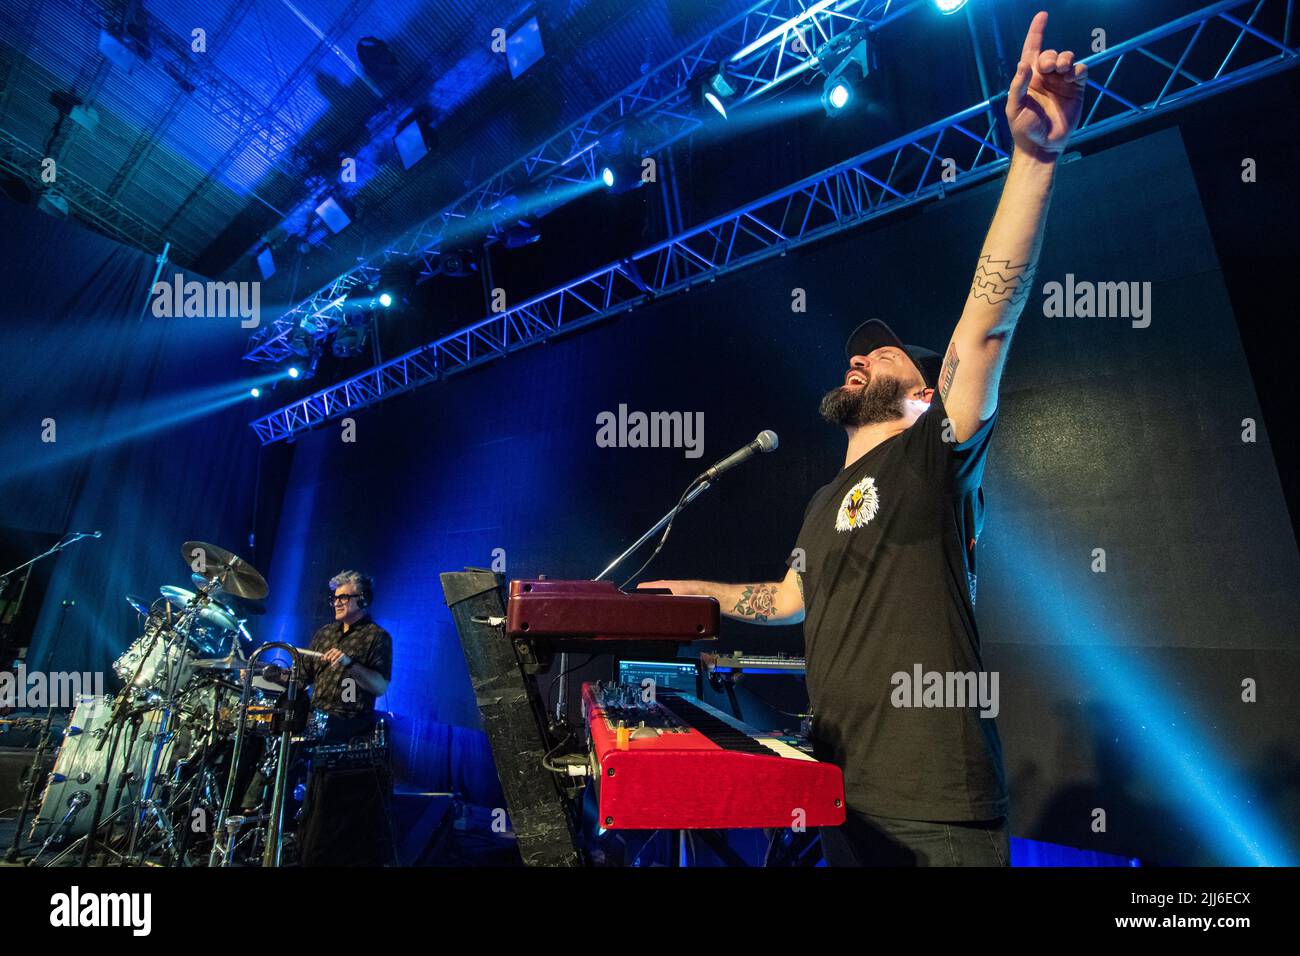 'No te va a gustar' performs for their crowd during a concert in Argentina. Stock Photo